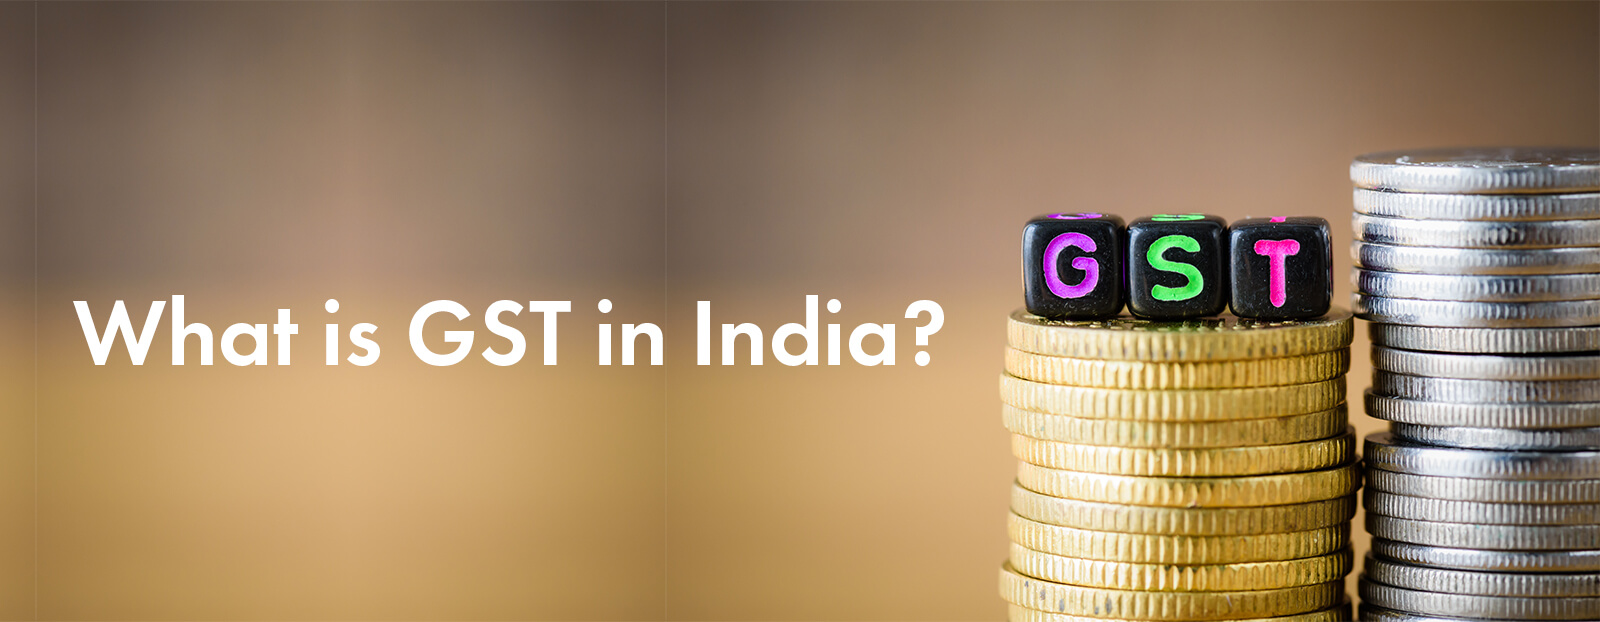 What is GST in India?